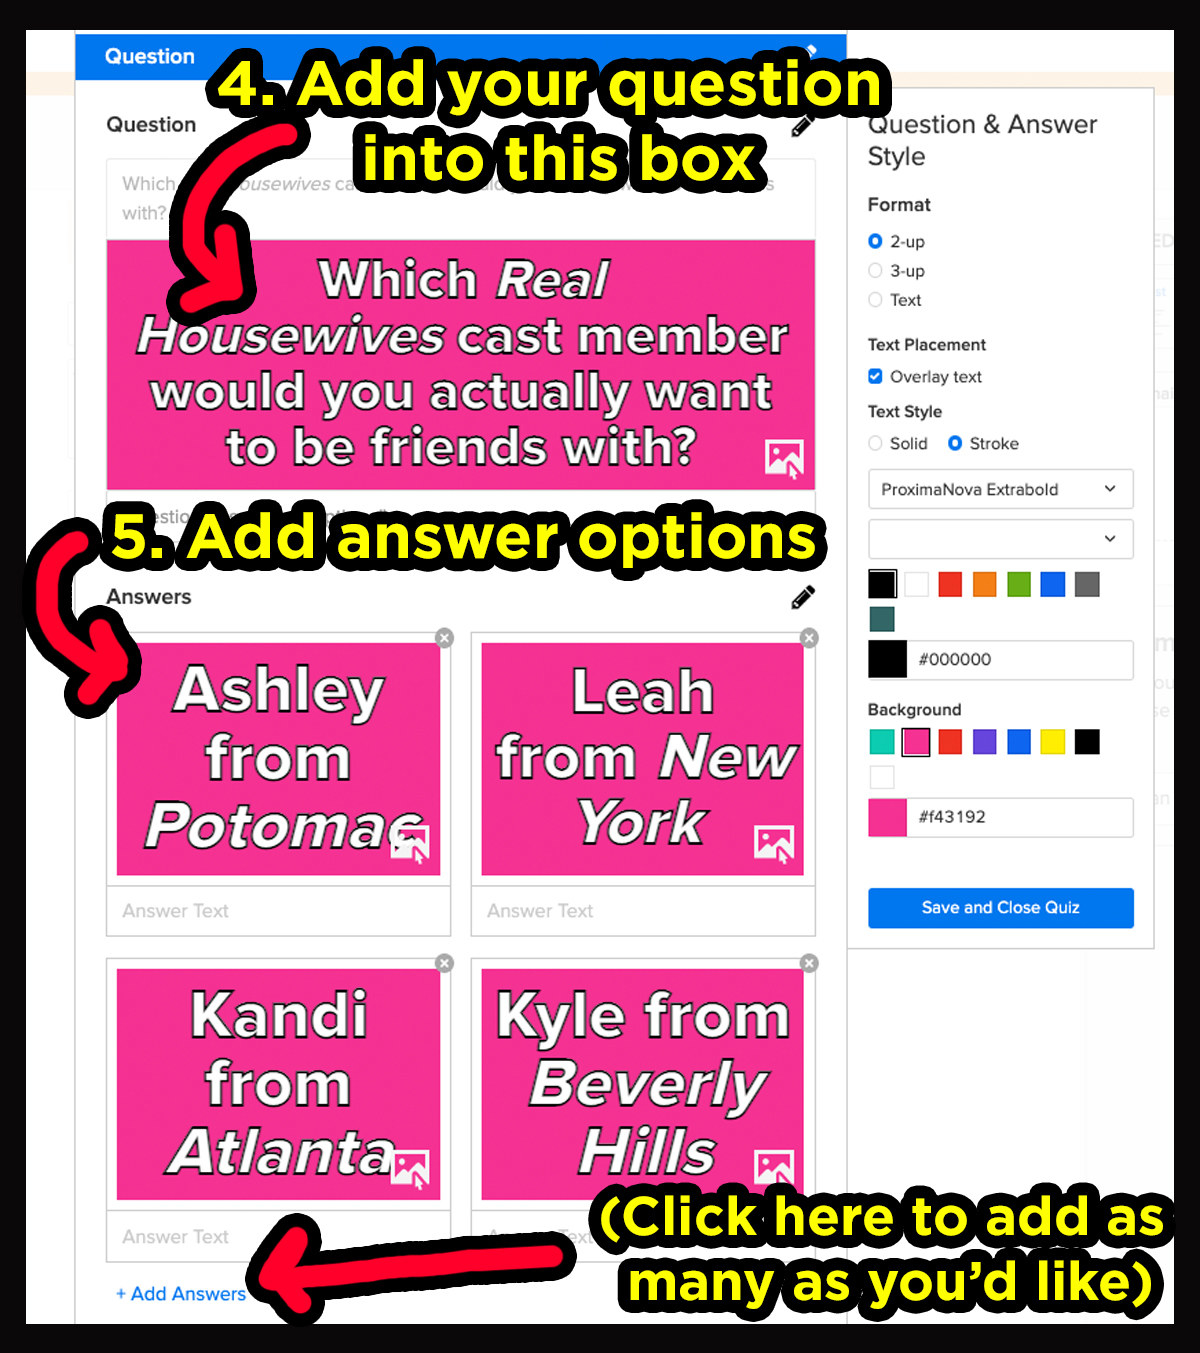 image of buzzfeed content system to show where to add questions, poll answers